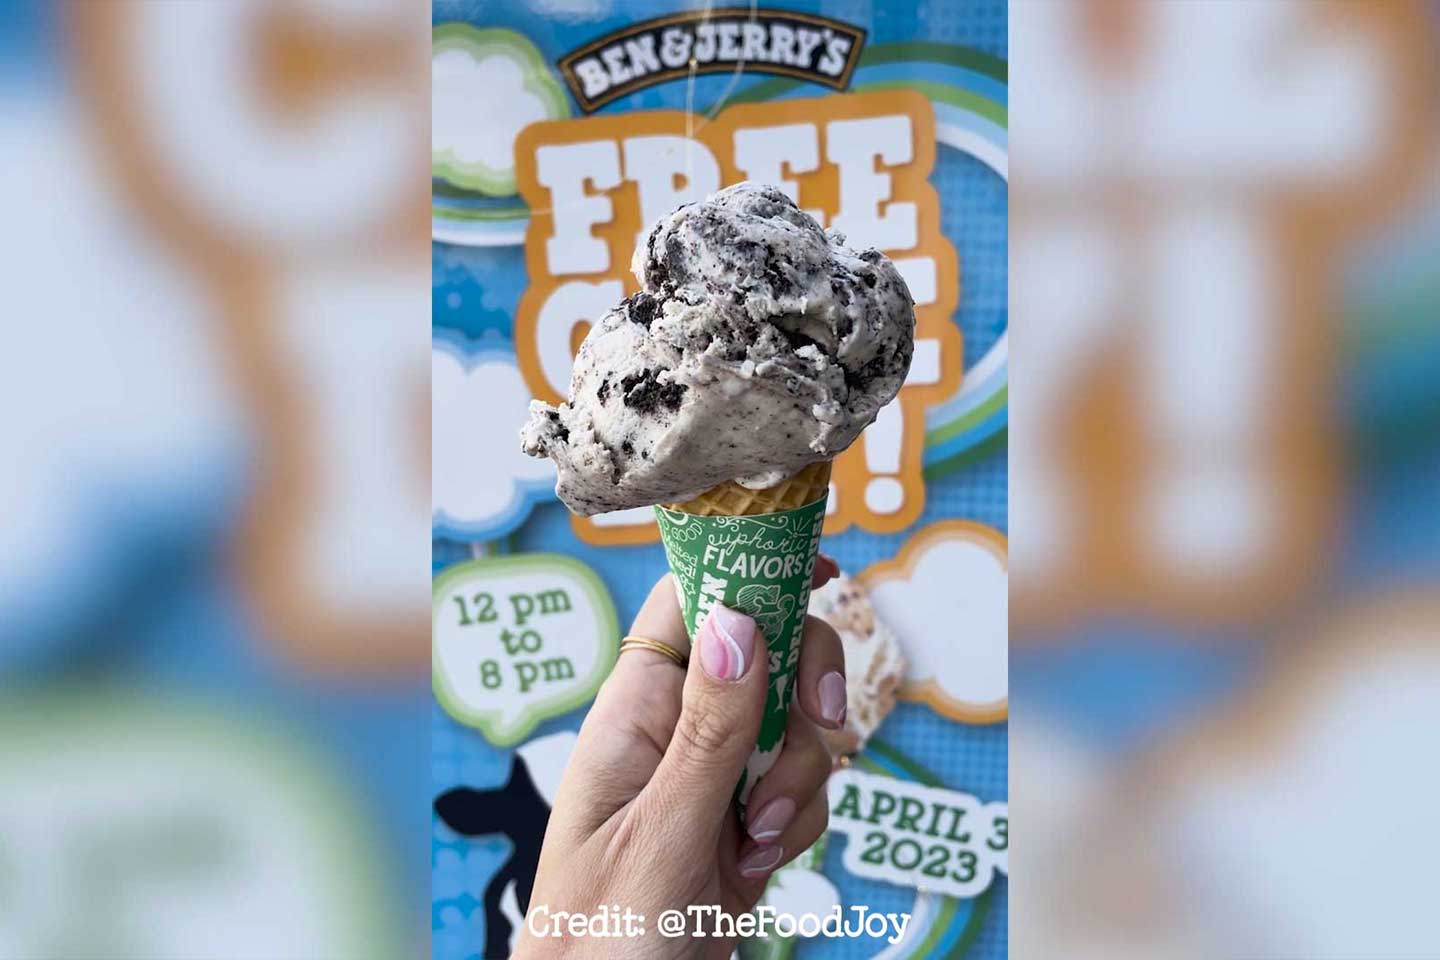 BEN &amp; JERRY'S FREE CONE DAY IS TODAY!